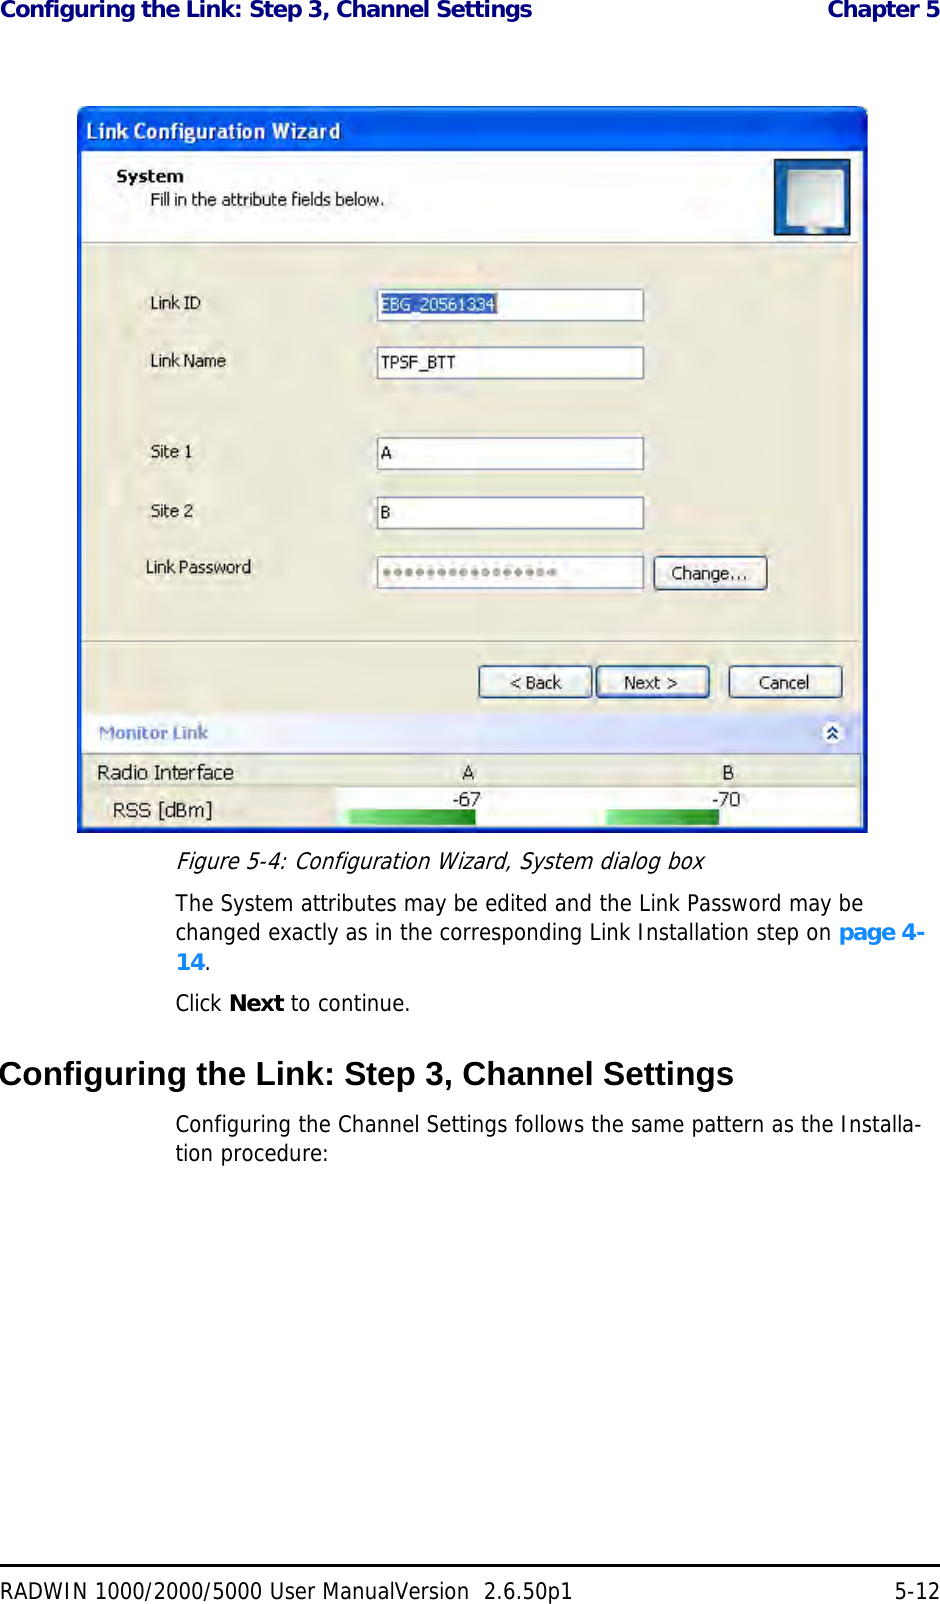 Configuring the Link: Step 3, Channel Settings  Chapter 5RADWIN 1000/2000/5000 User ManualVersion  2.6.50p1 5-12Figure 5-4: Configuration Wizard, System dialog boxThe System attributes may be edited and the Link Password may be changed exactly as in the corresponding Link Installation step on page 4-14.Click Next to continue.Configuring the Link: Step 3, Channel SettingsConfiguring the Channel Settings follows the same pattern as the Installa-tion procedure: